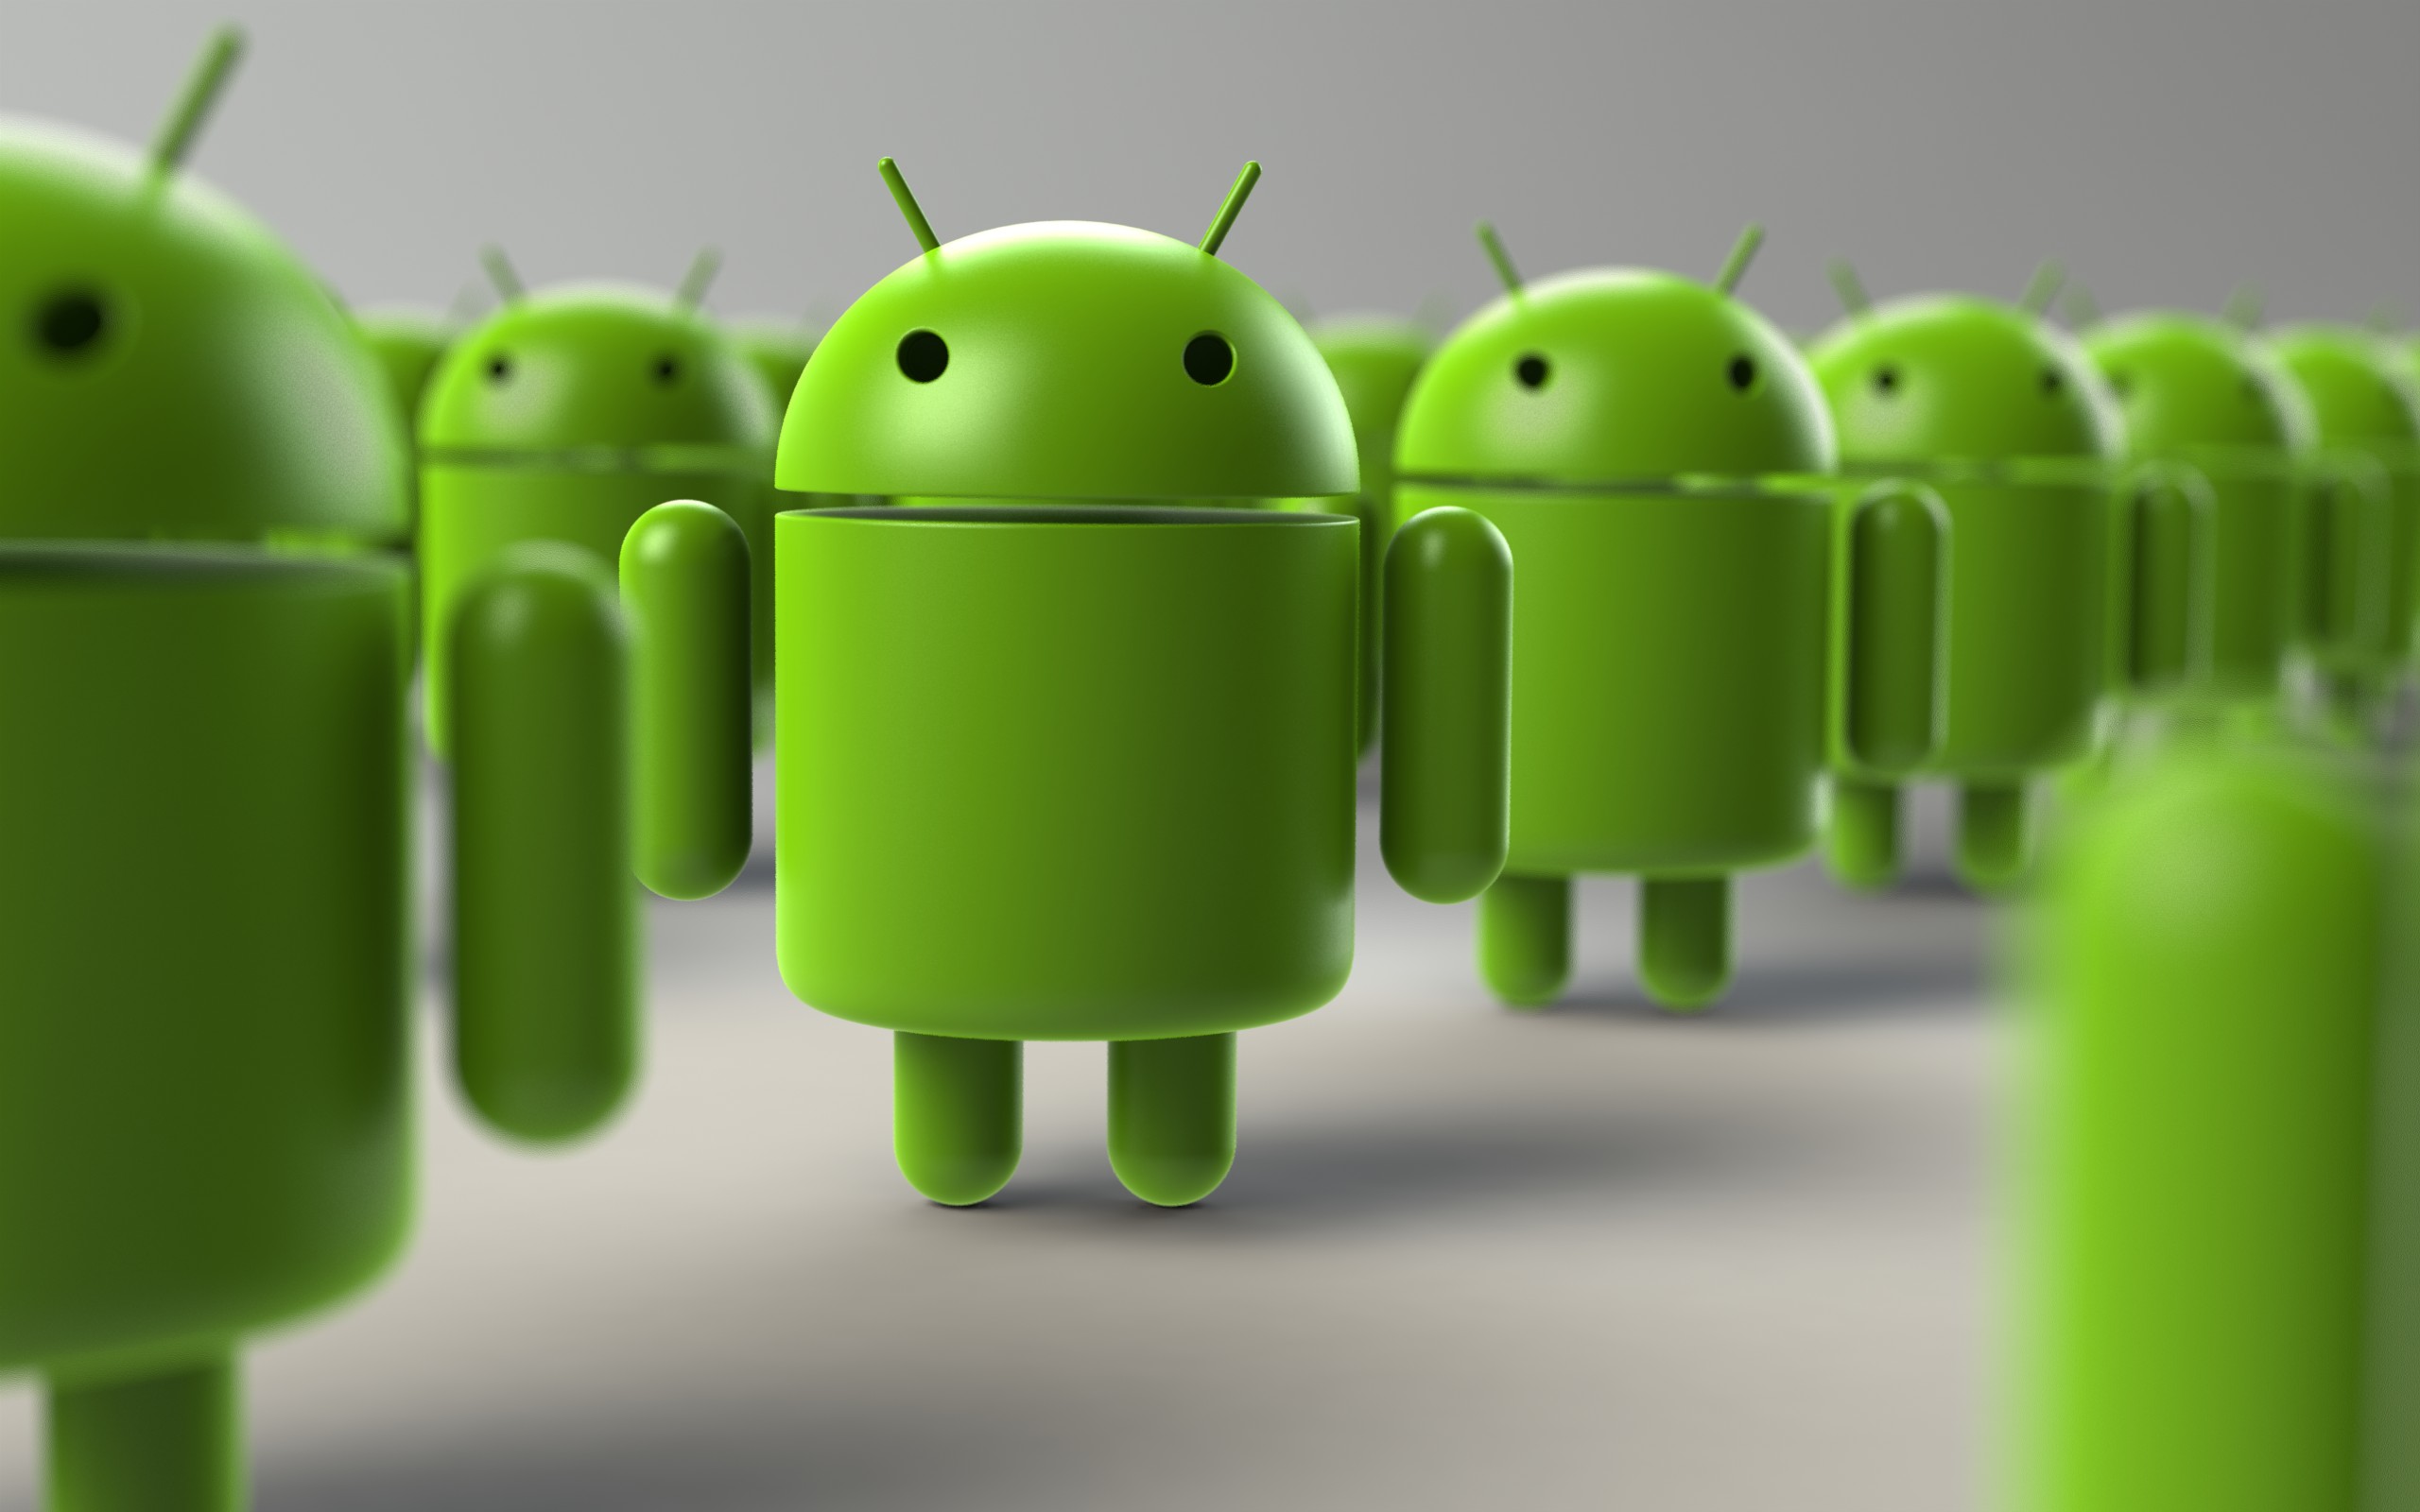 Android Operating System